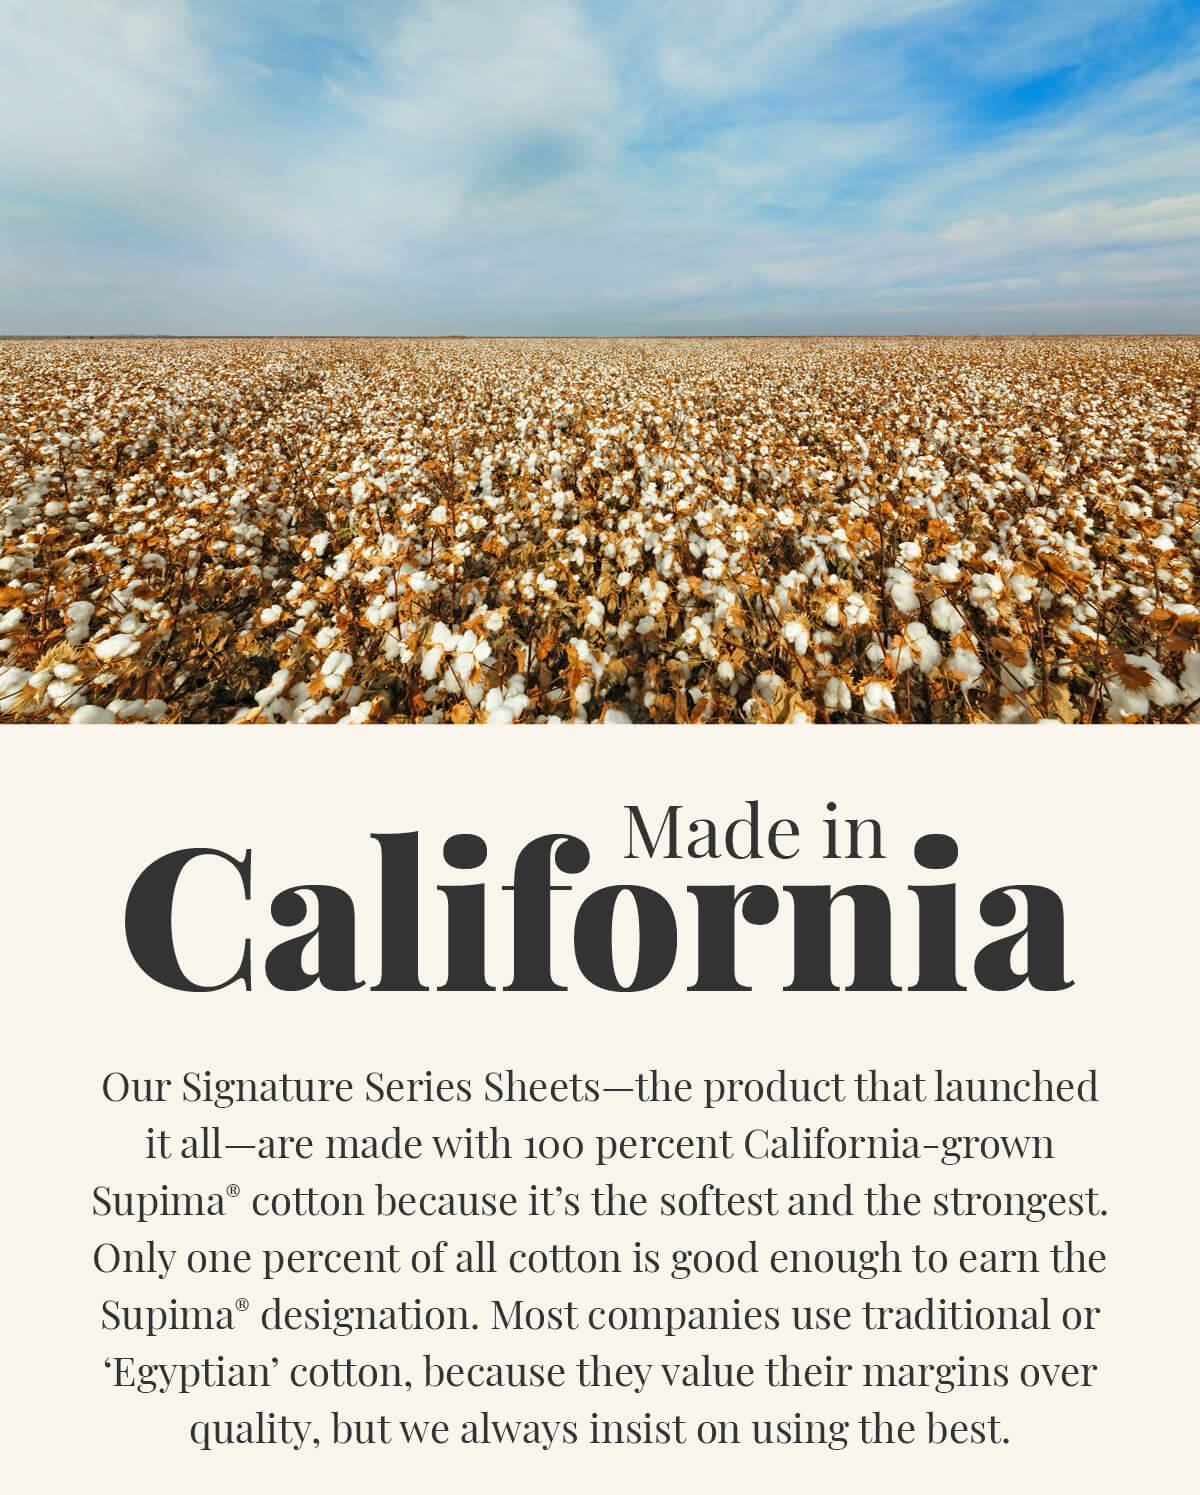 made with 100 percent California-grown Supima cotton